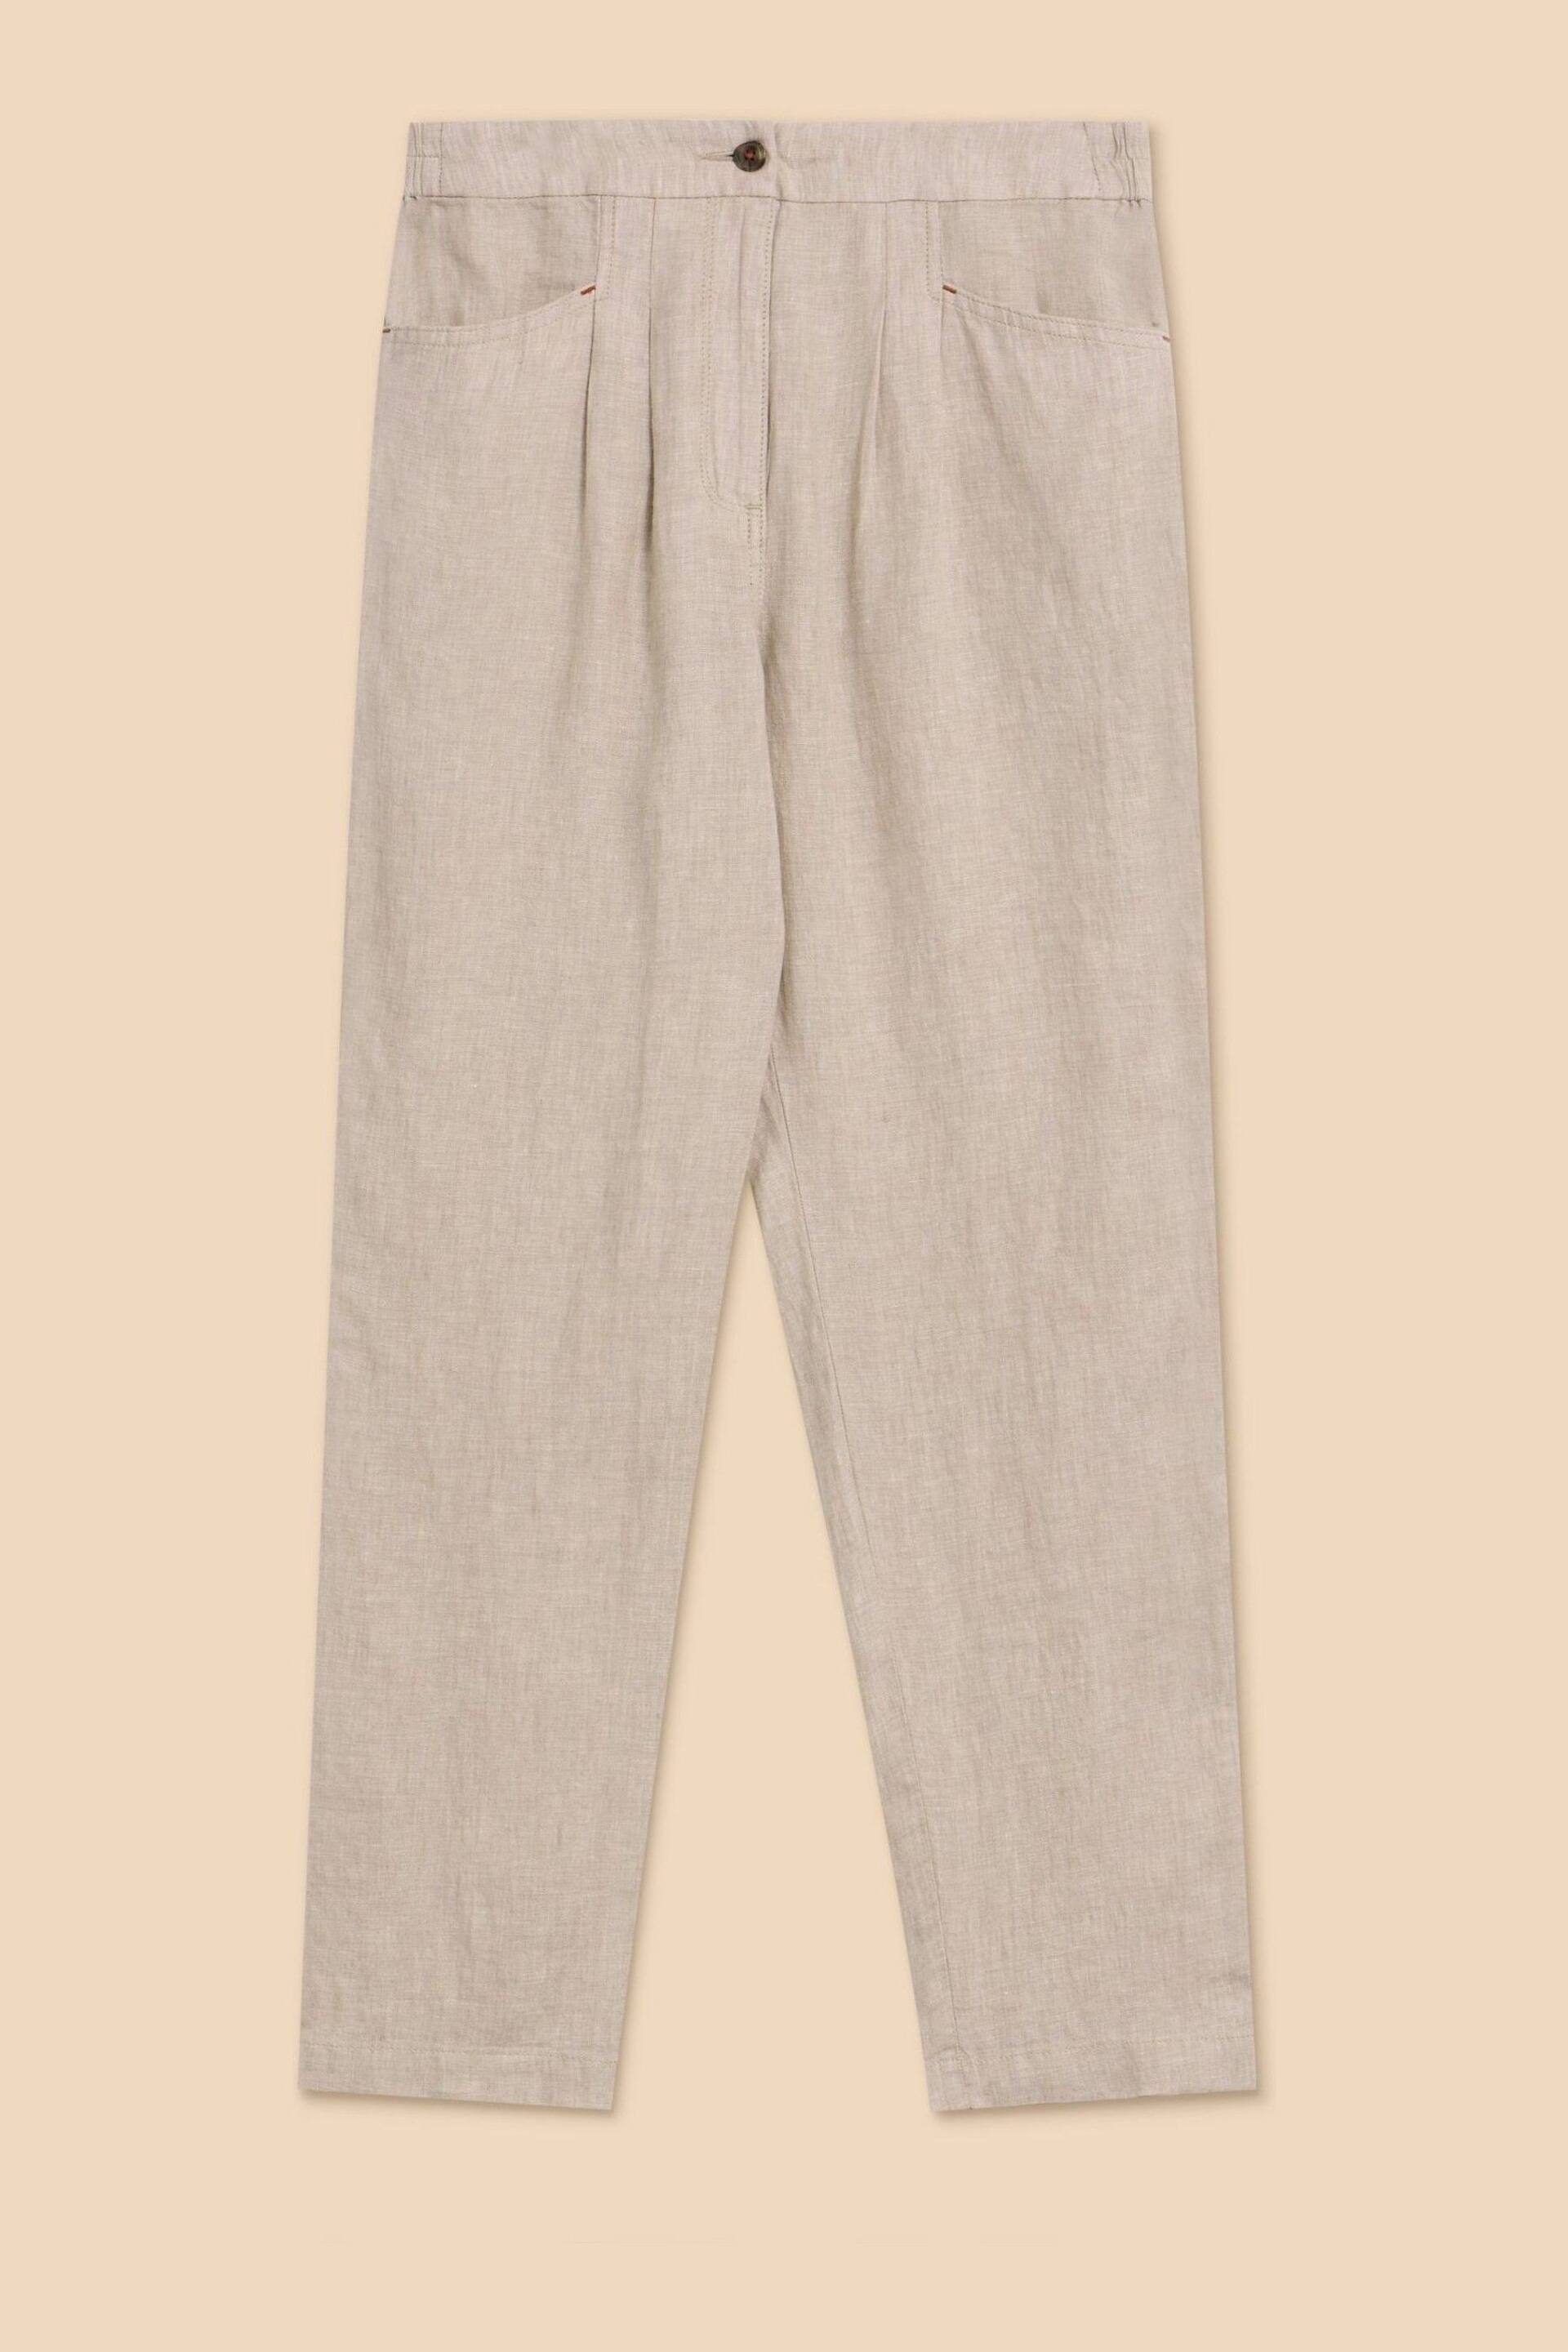 White Stuff Natural Rowena Linen Trousers - Image 5 of 7